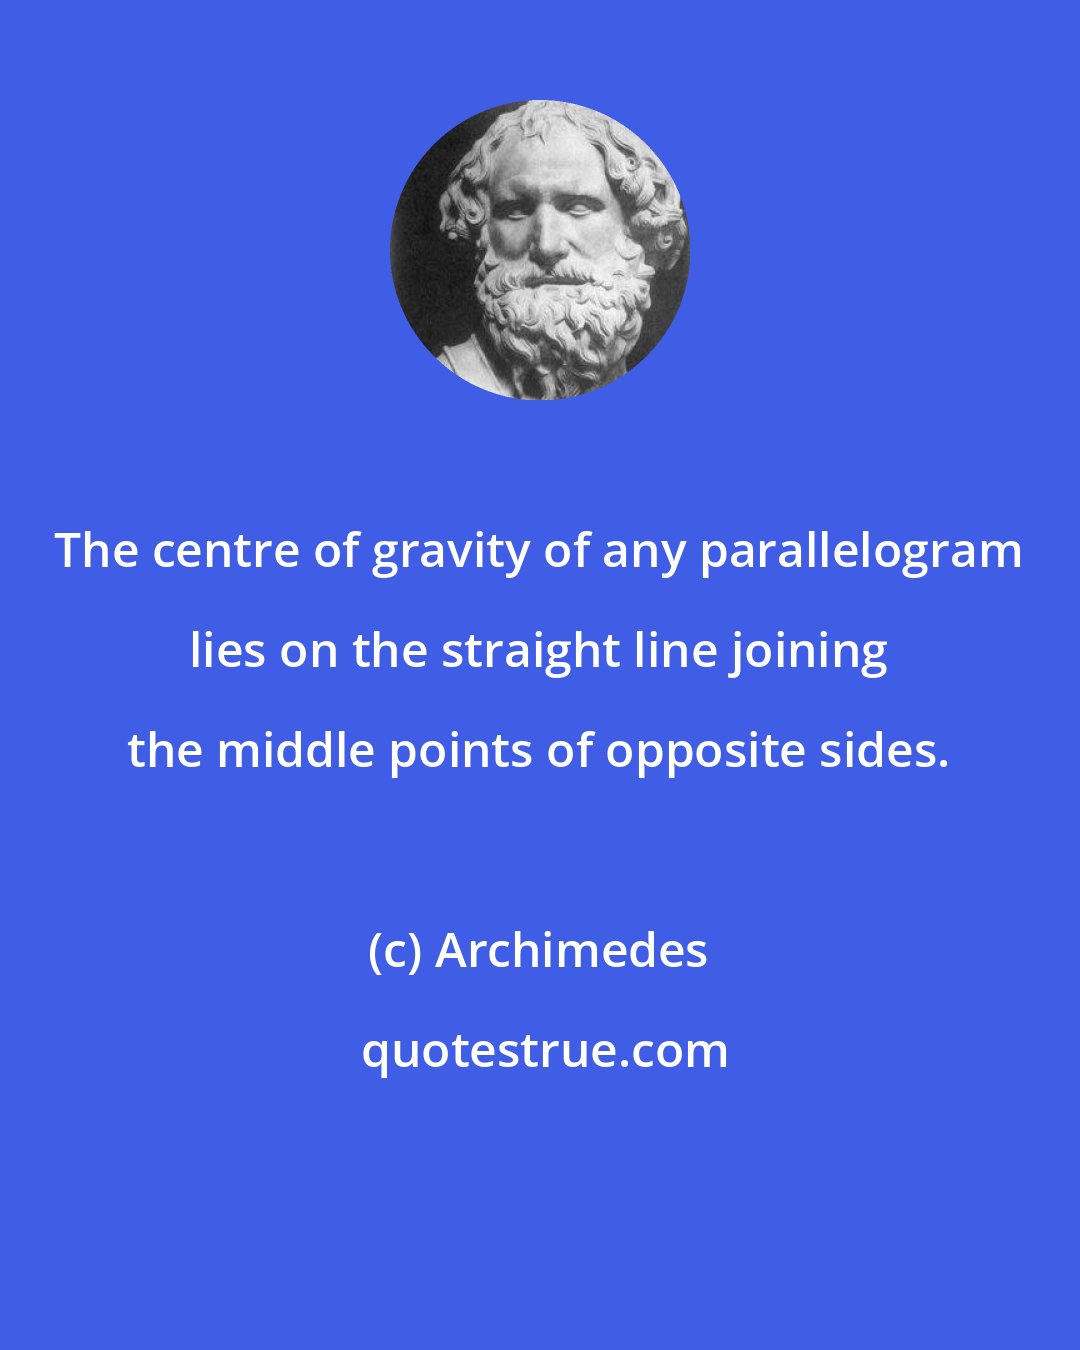 Archimedes: The centre of gravity of any parallelogram lies on the straight line joining the middle points of opposite sides.